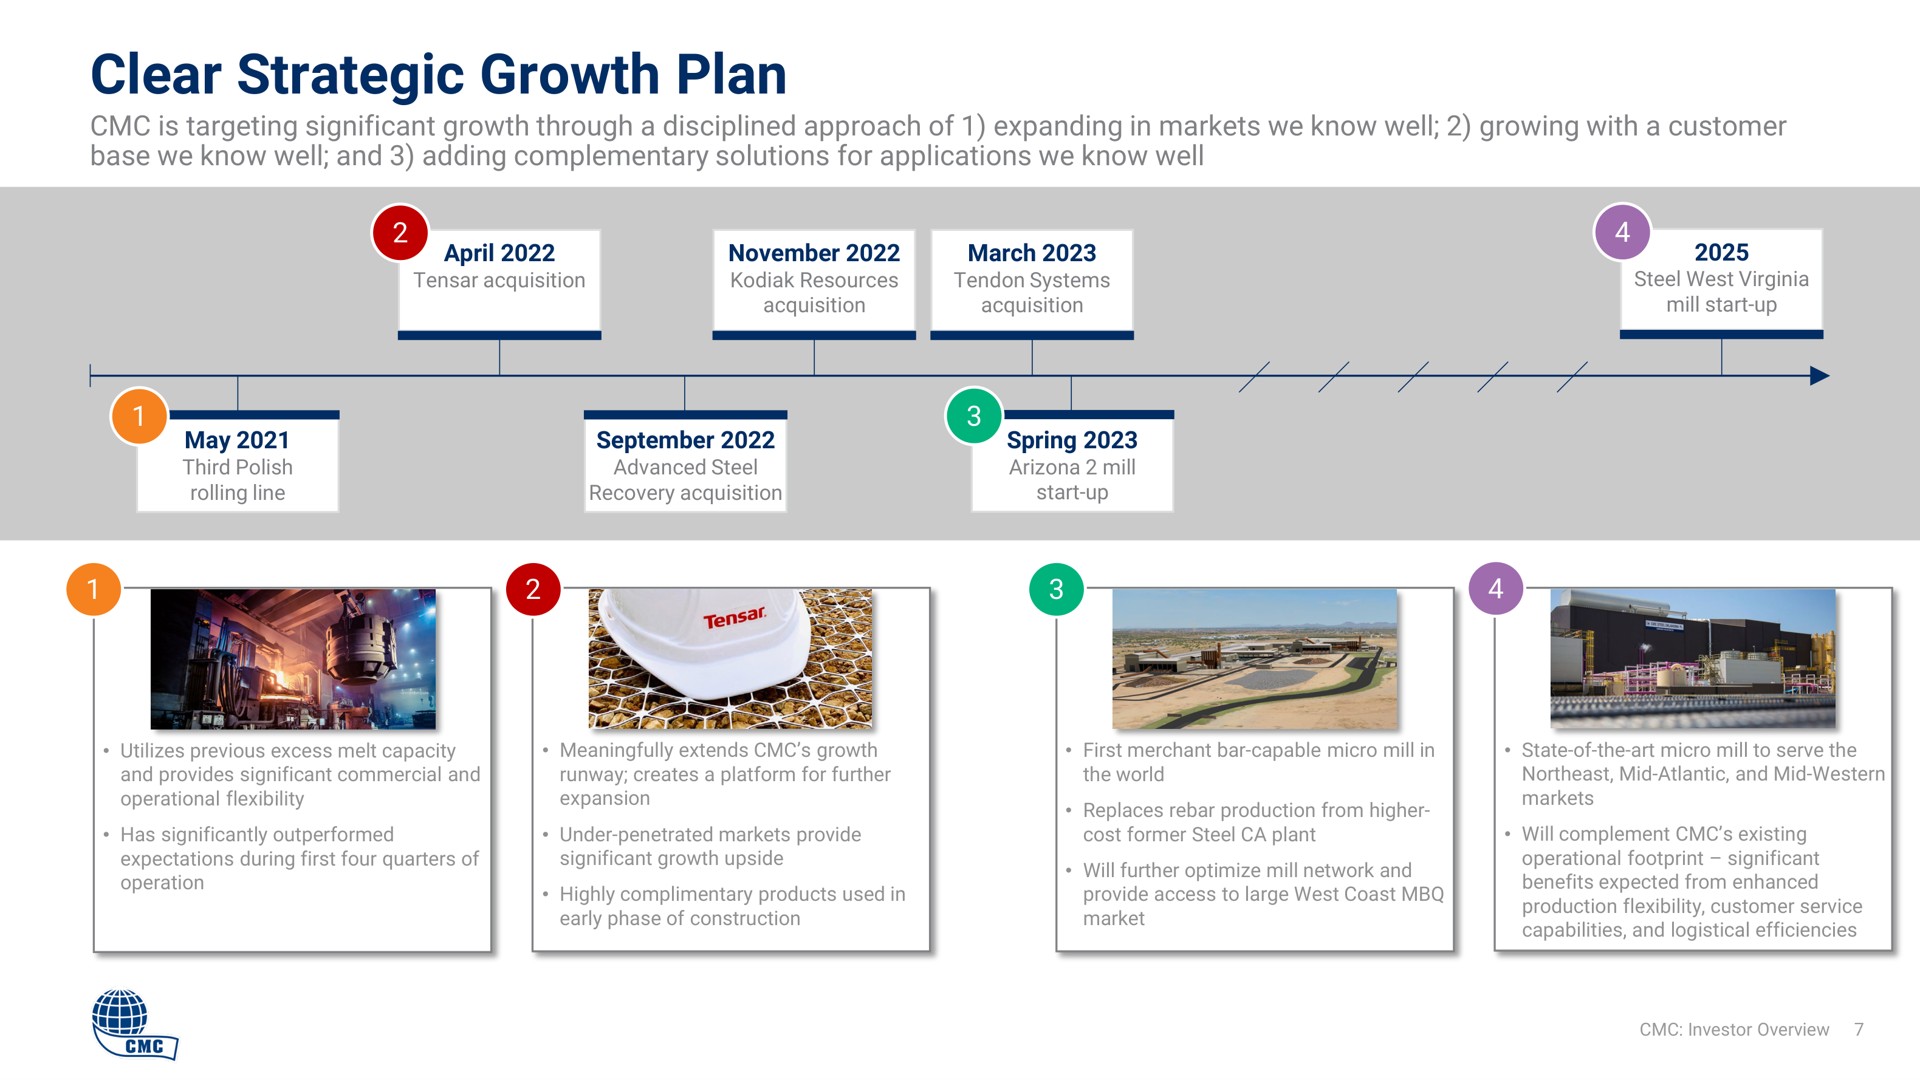 clear strategic growth plan | Commercial Metals Company